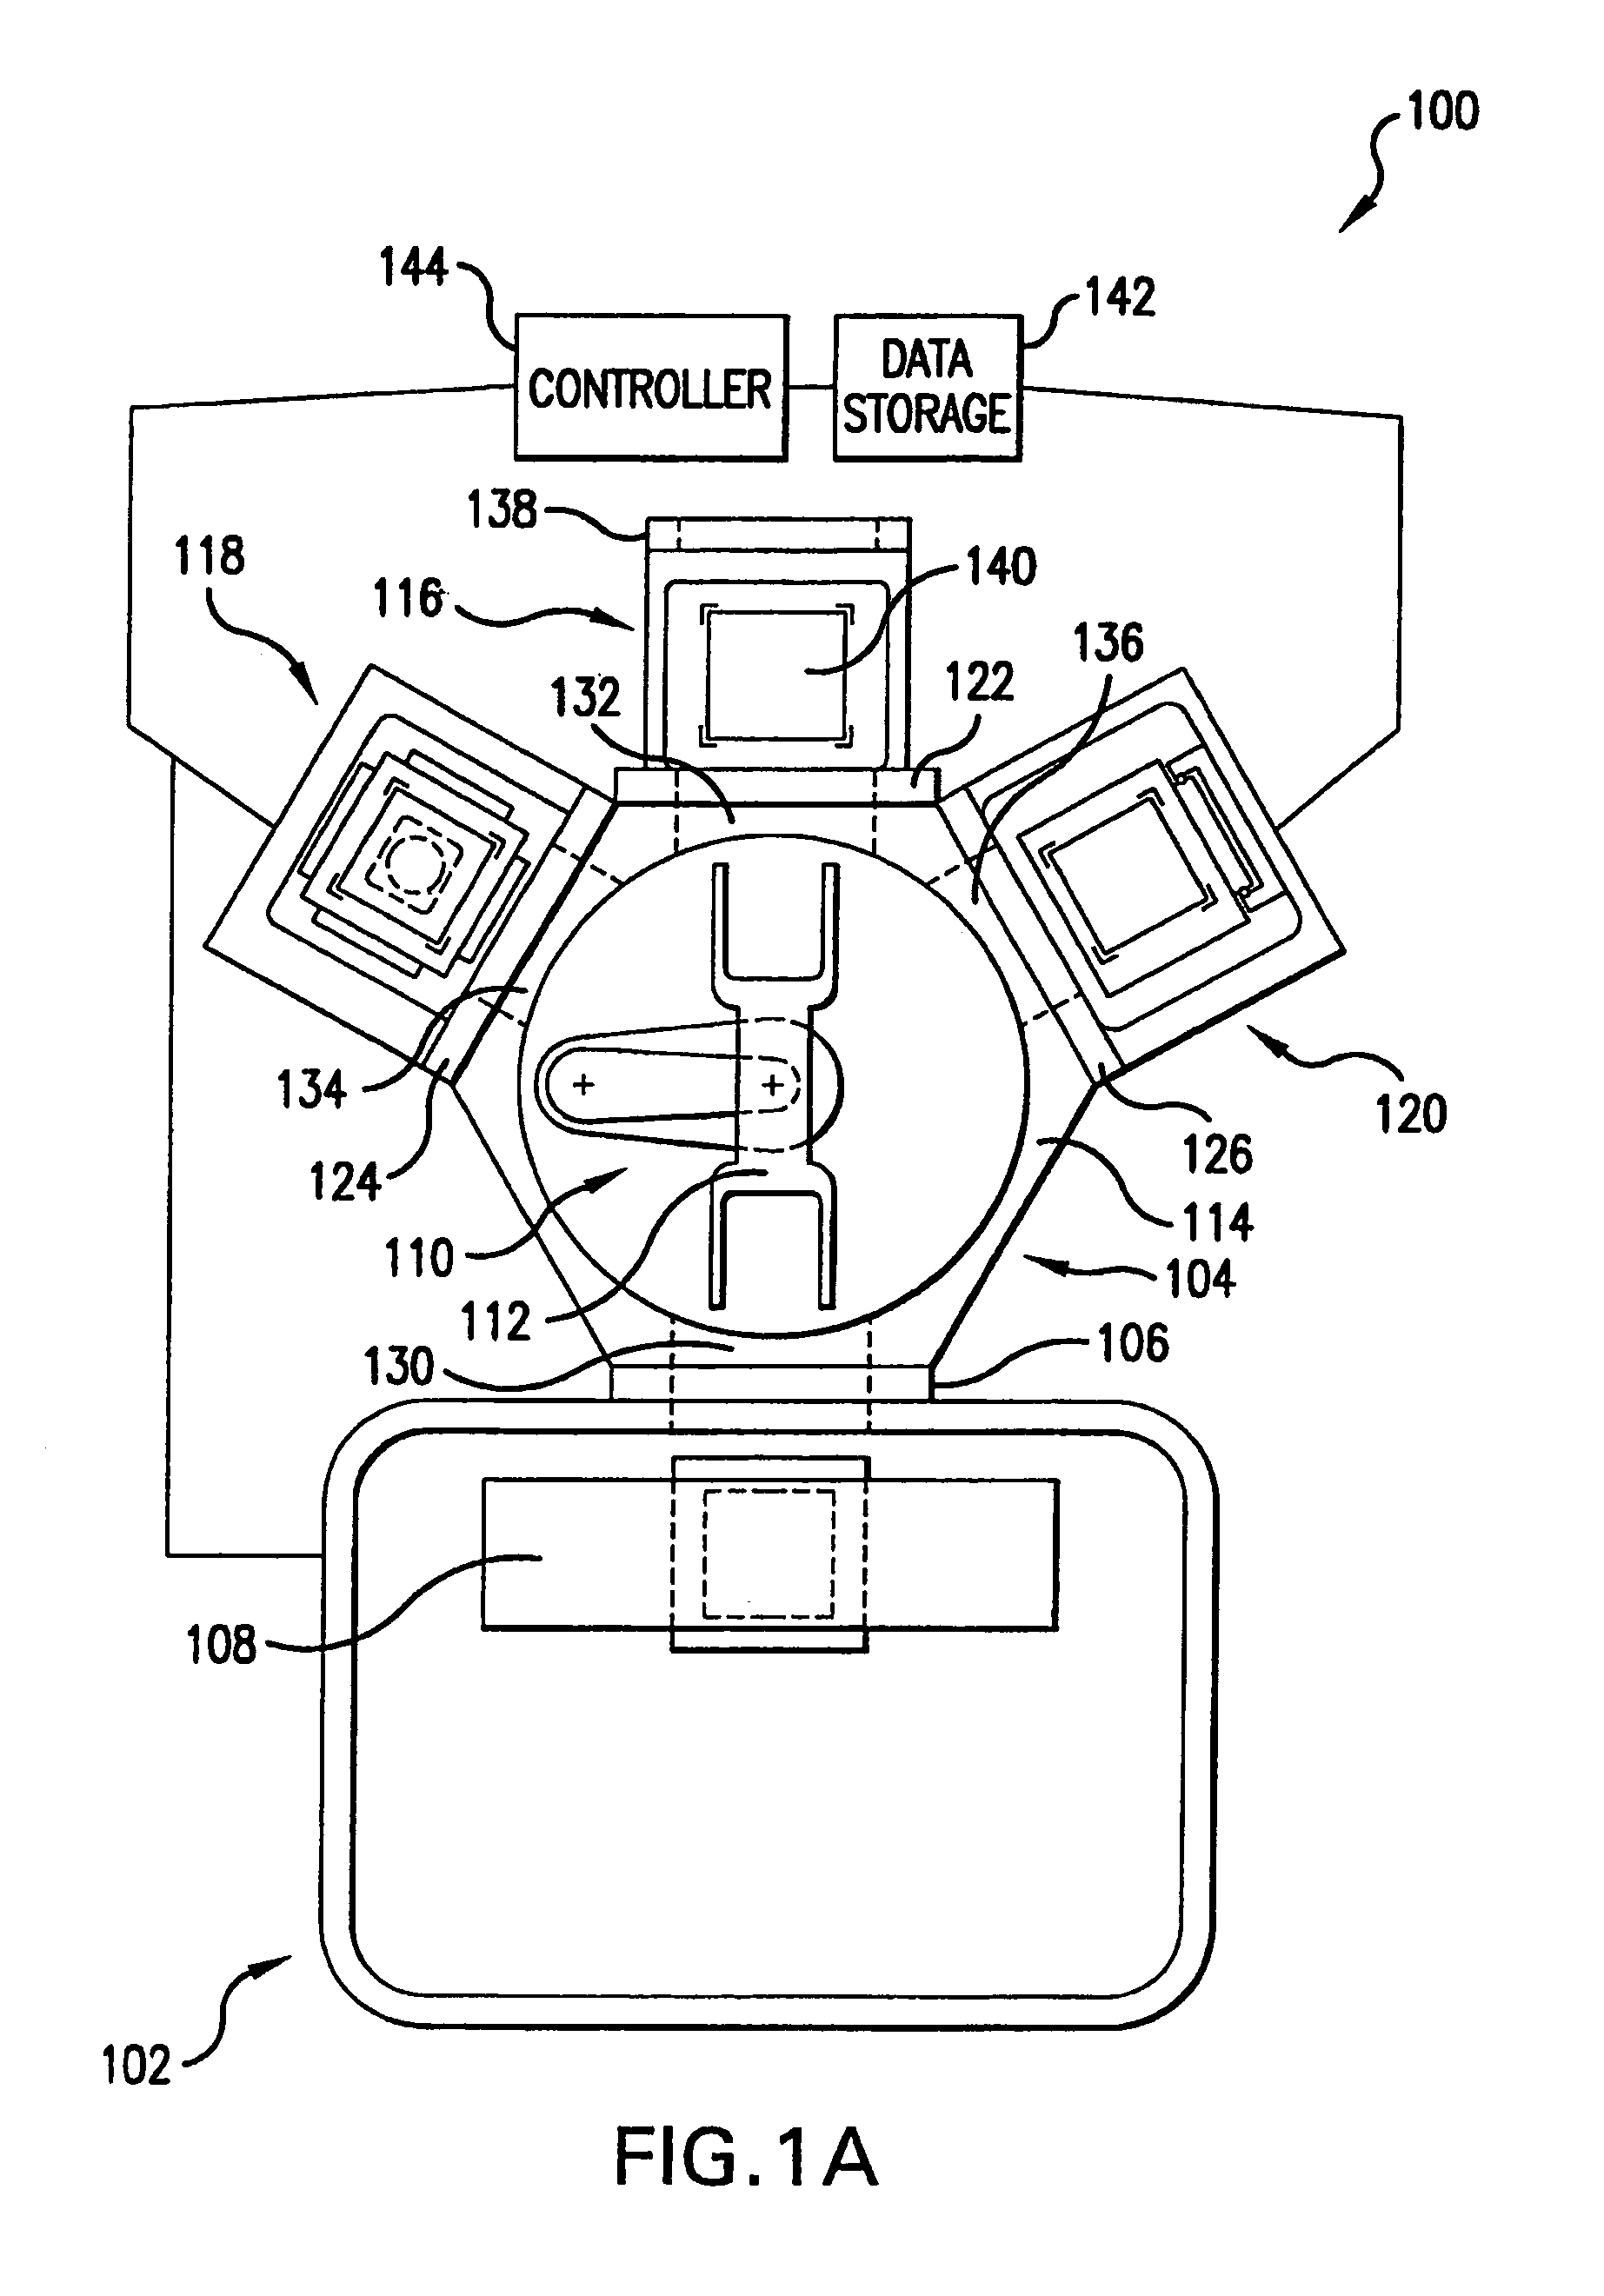 Lithography tool having a vacuum reticle library coupled to a vacuum chamber